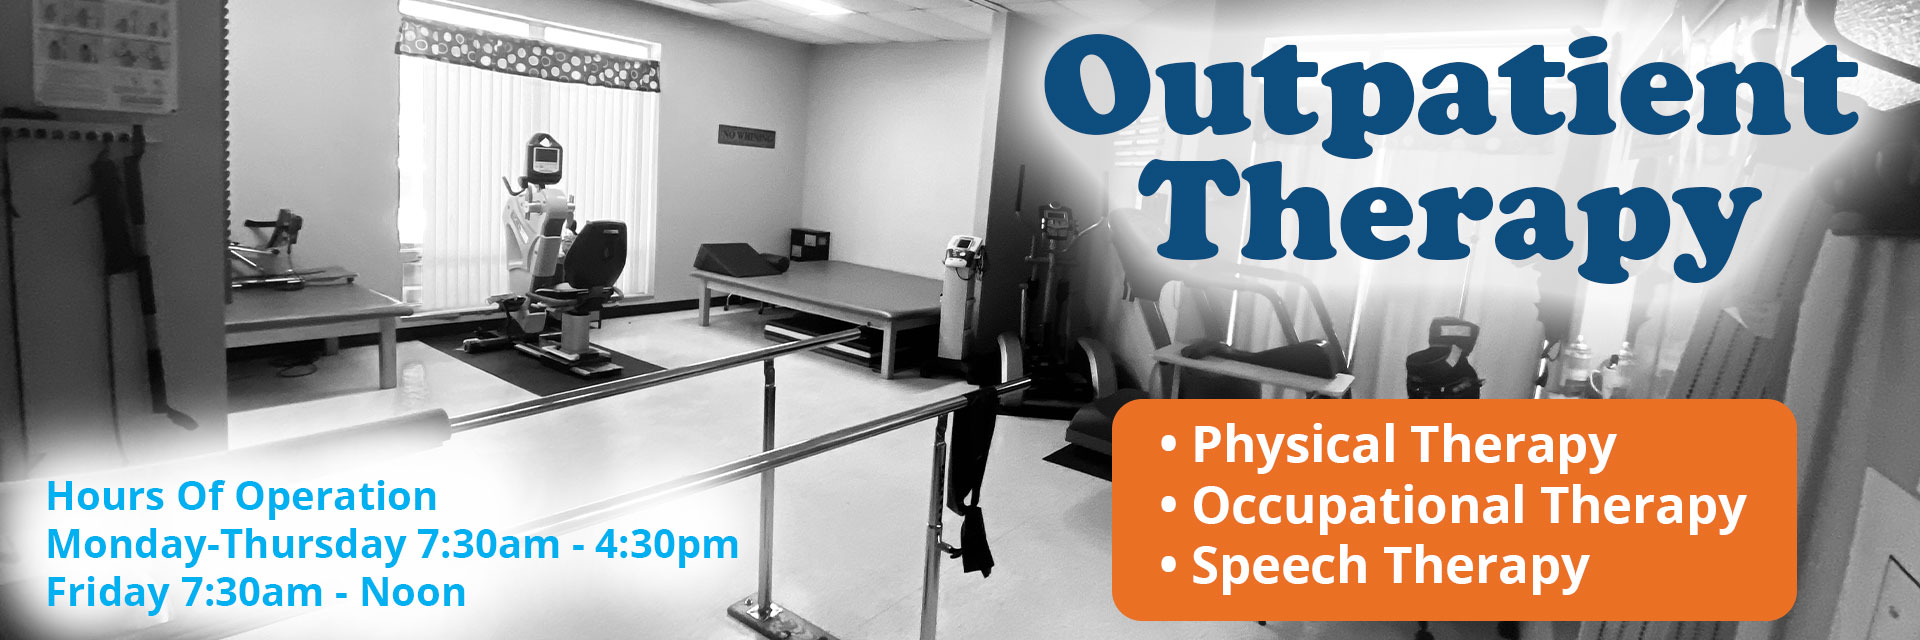 Outpatient Therapy